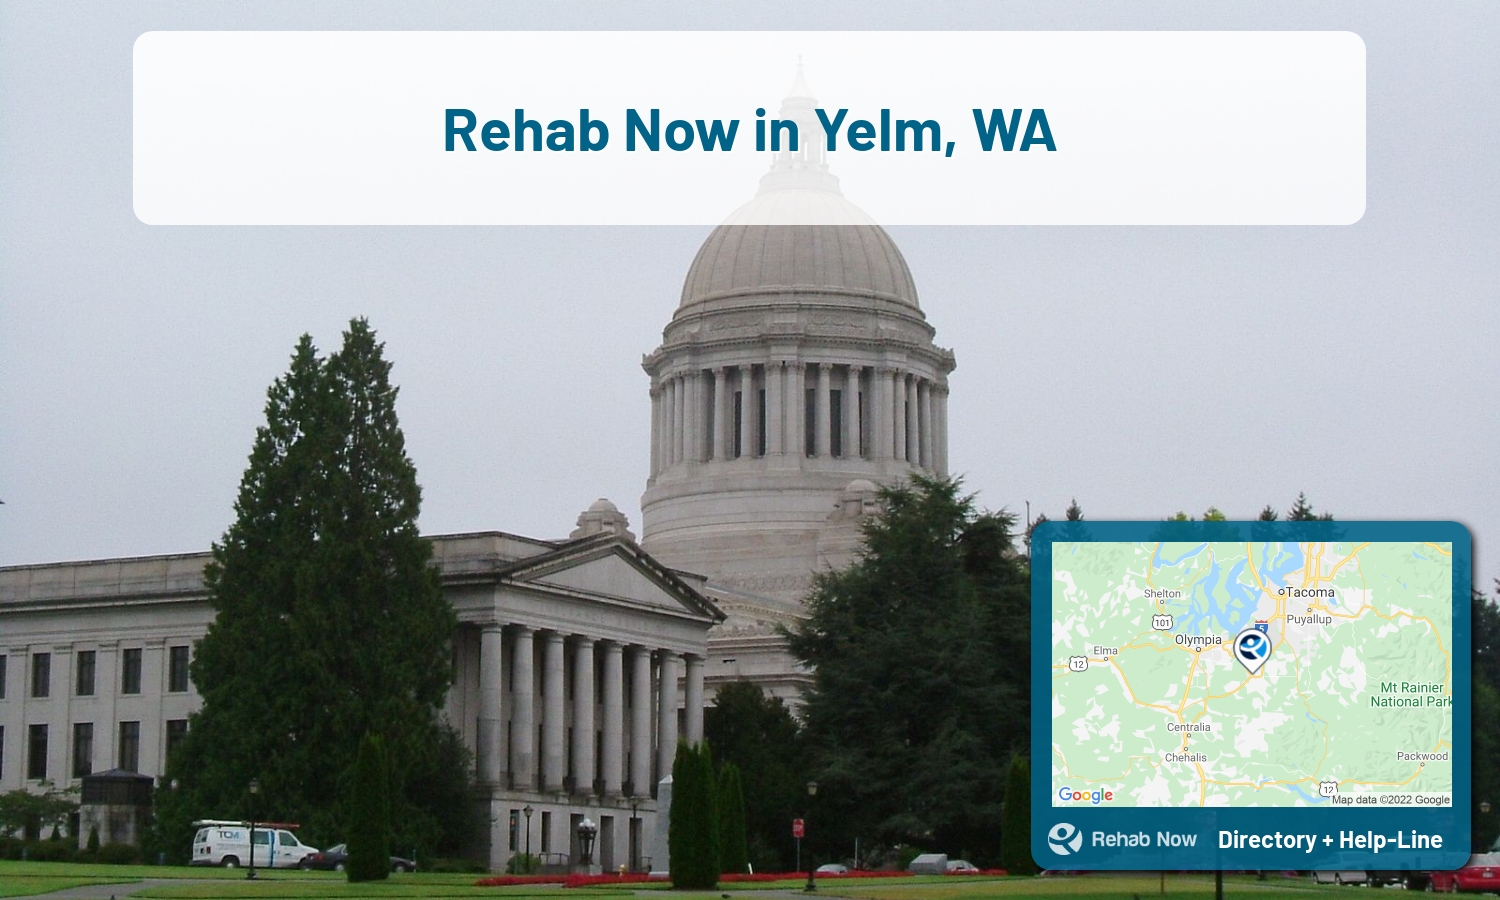 Our experts can help you find treatment now in Yelm, Washington. We list drug rehab and alcohol centers in Washington.